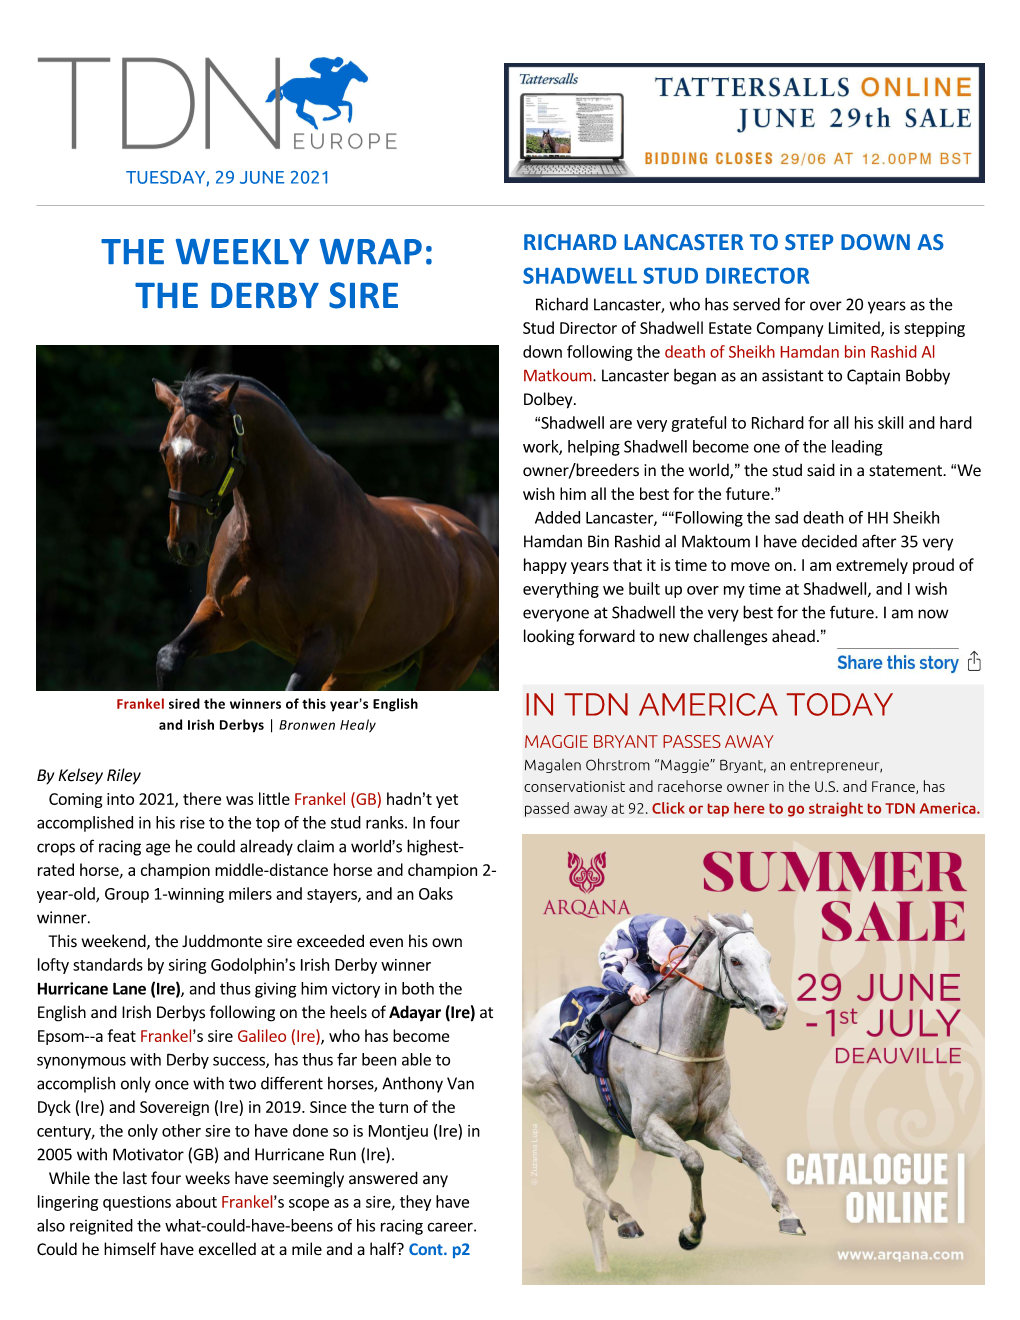 Tdn Europe • Page 2 of 10 • Thetdn.Com Tuesday • 29 June 2021